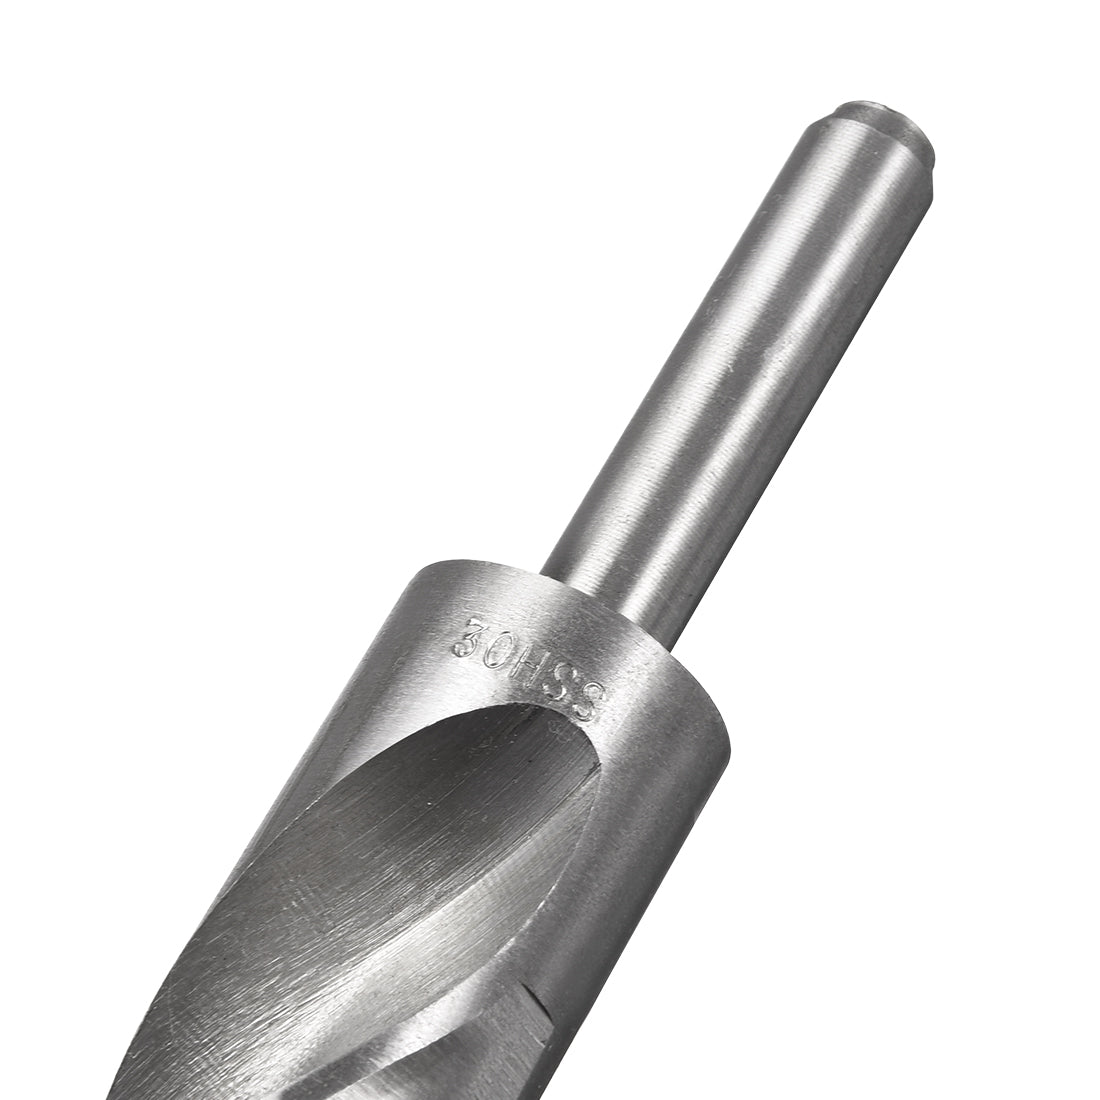 uxcell Uxcell 30mm Reduced Shank Drill Bit High Speed Steel 4241 with 1/2" Straight Shank